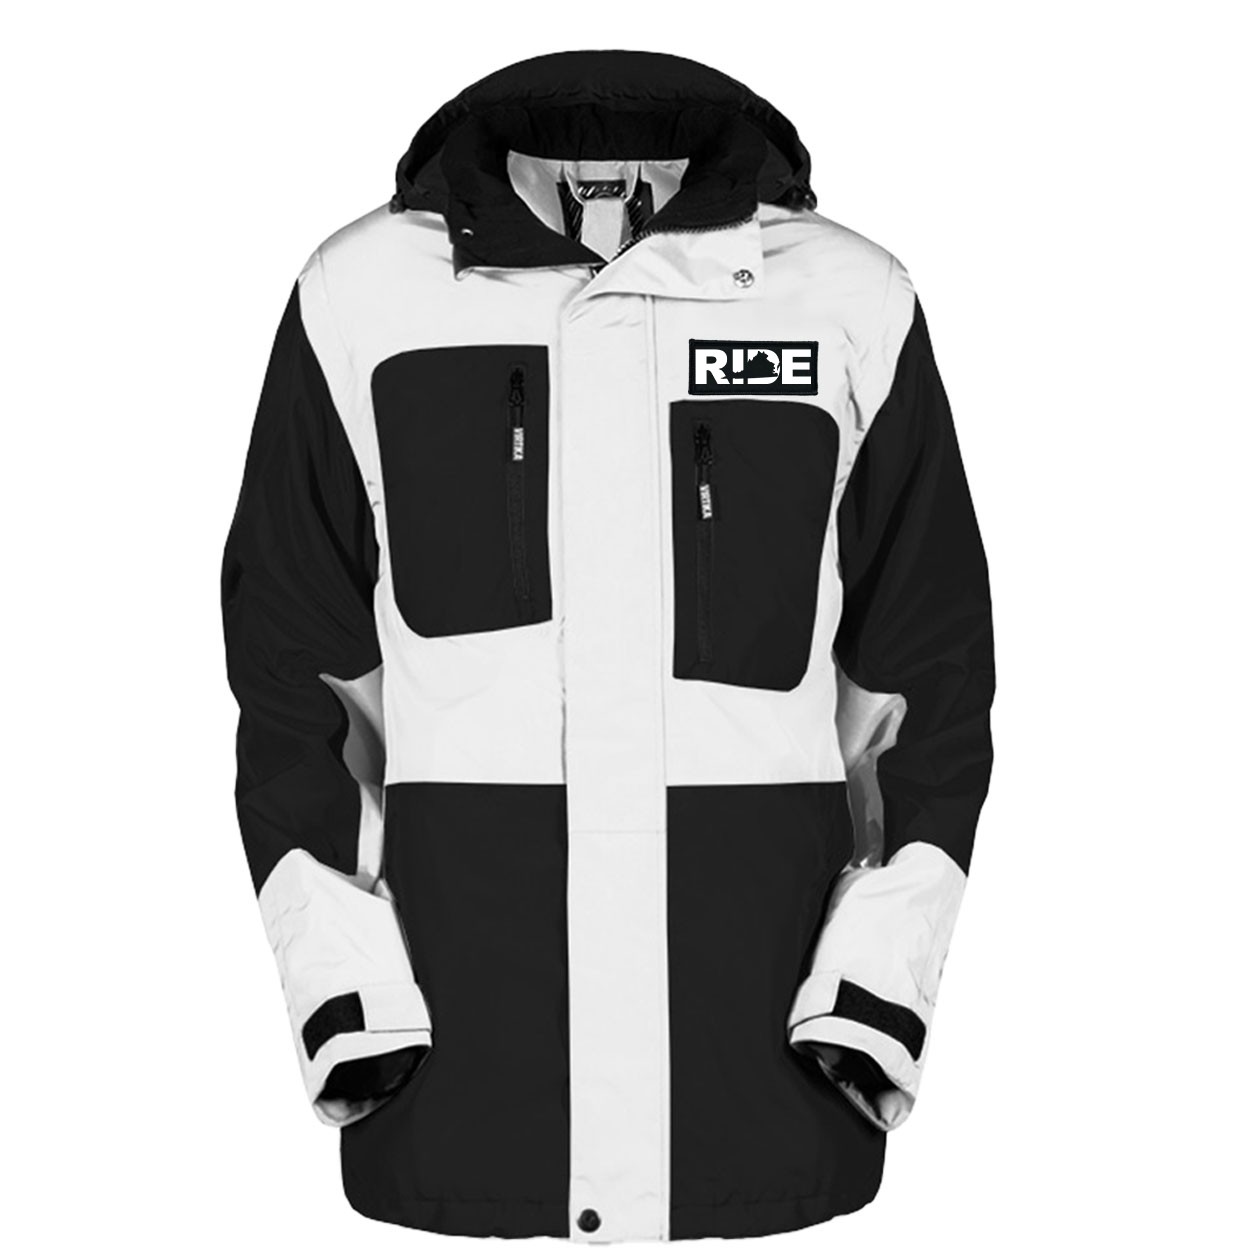 Ride Virginia Classic Woven Patch Pro Snowboard Jacket (Black/White)